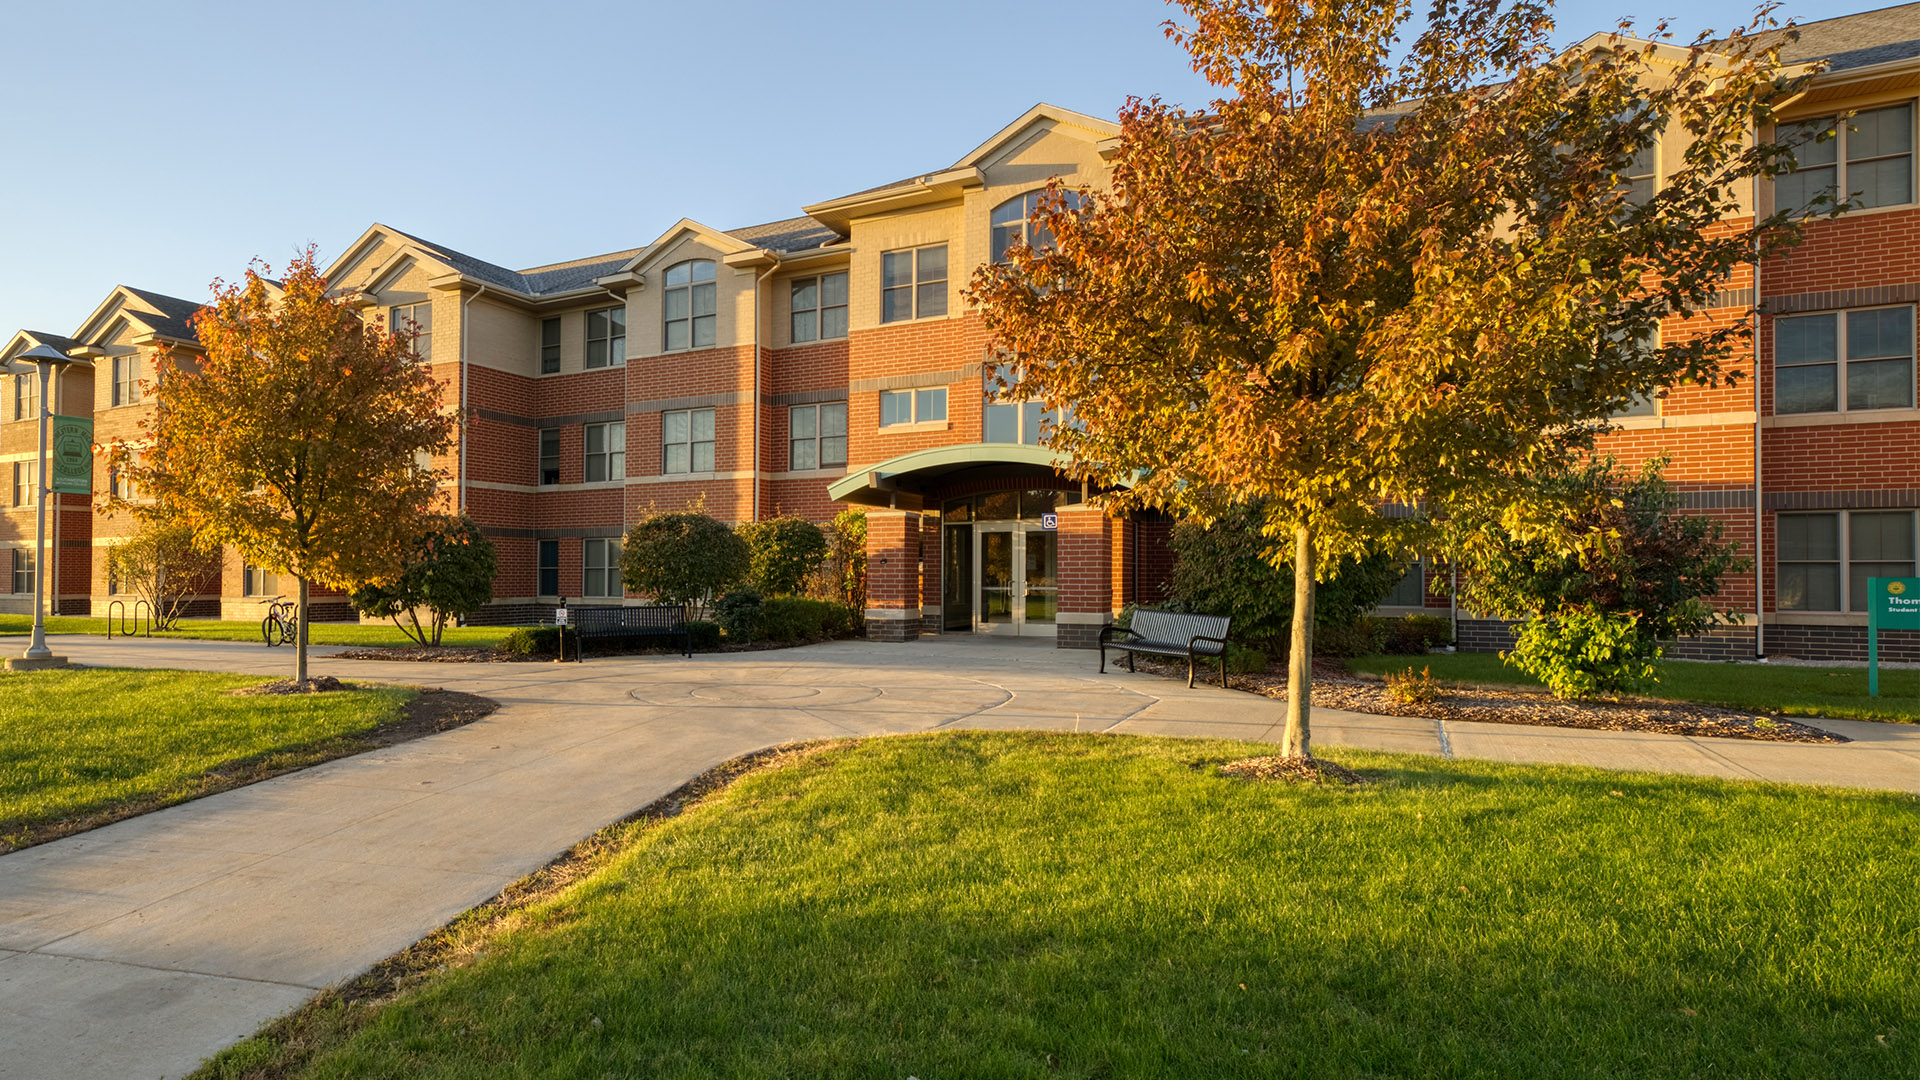 Exterior of one of SMC's residence halls